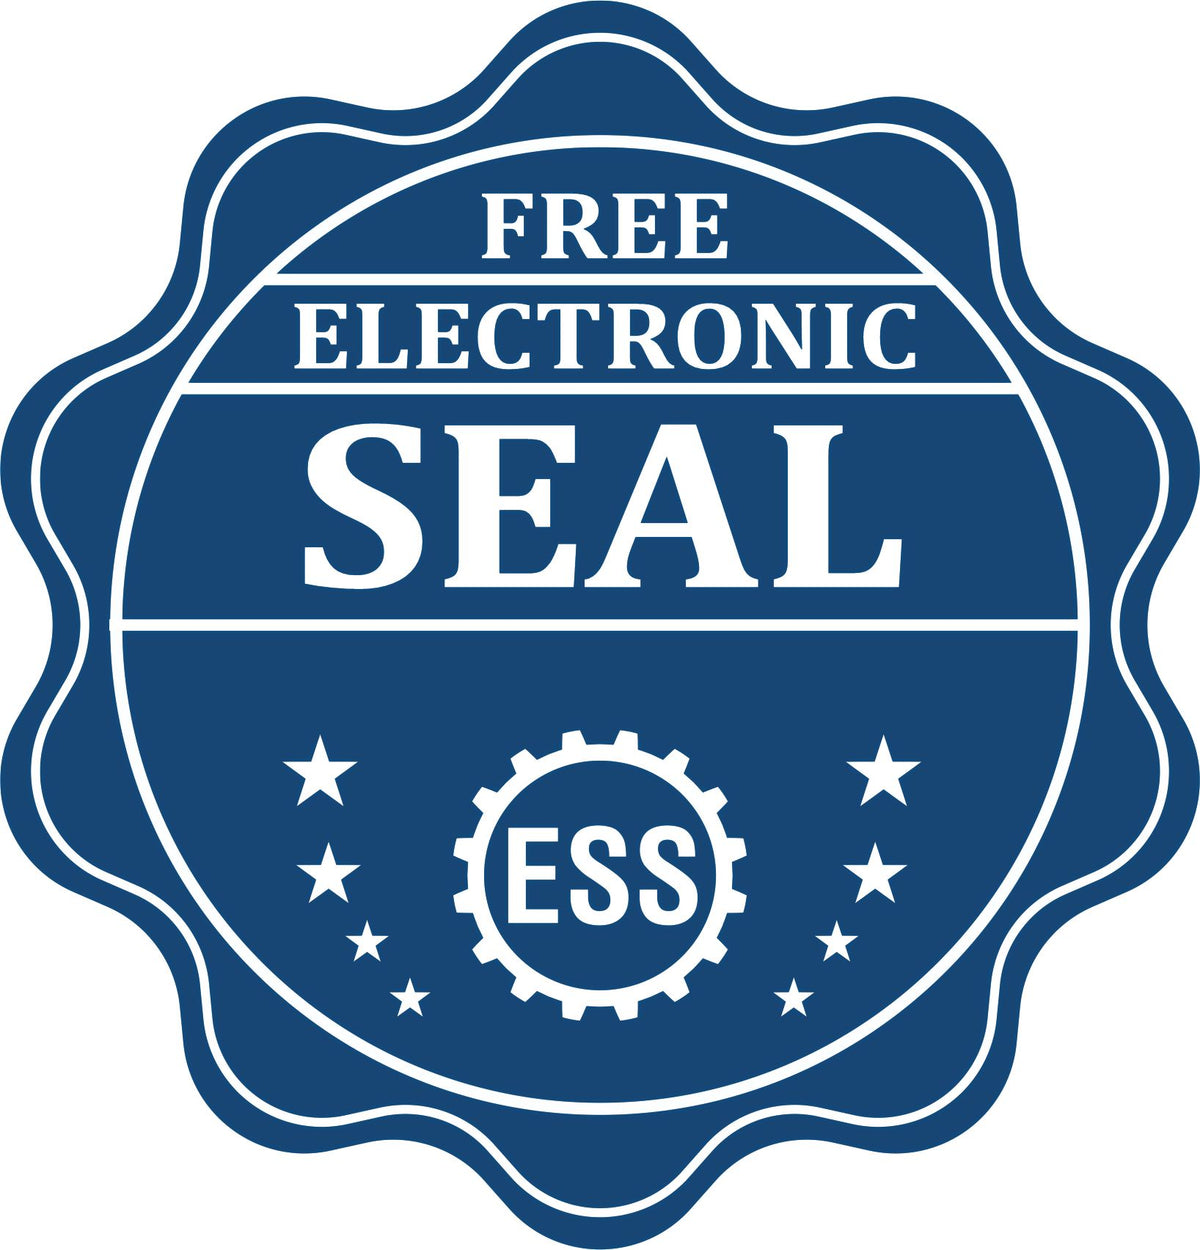 A badge showing a free electronic seal for the Wyoming Engineer Desk Seal with stars and the ESS gear on the emblem.